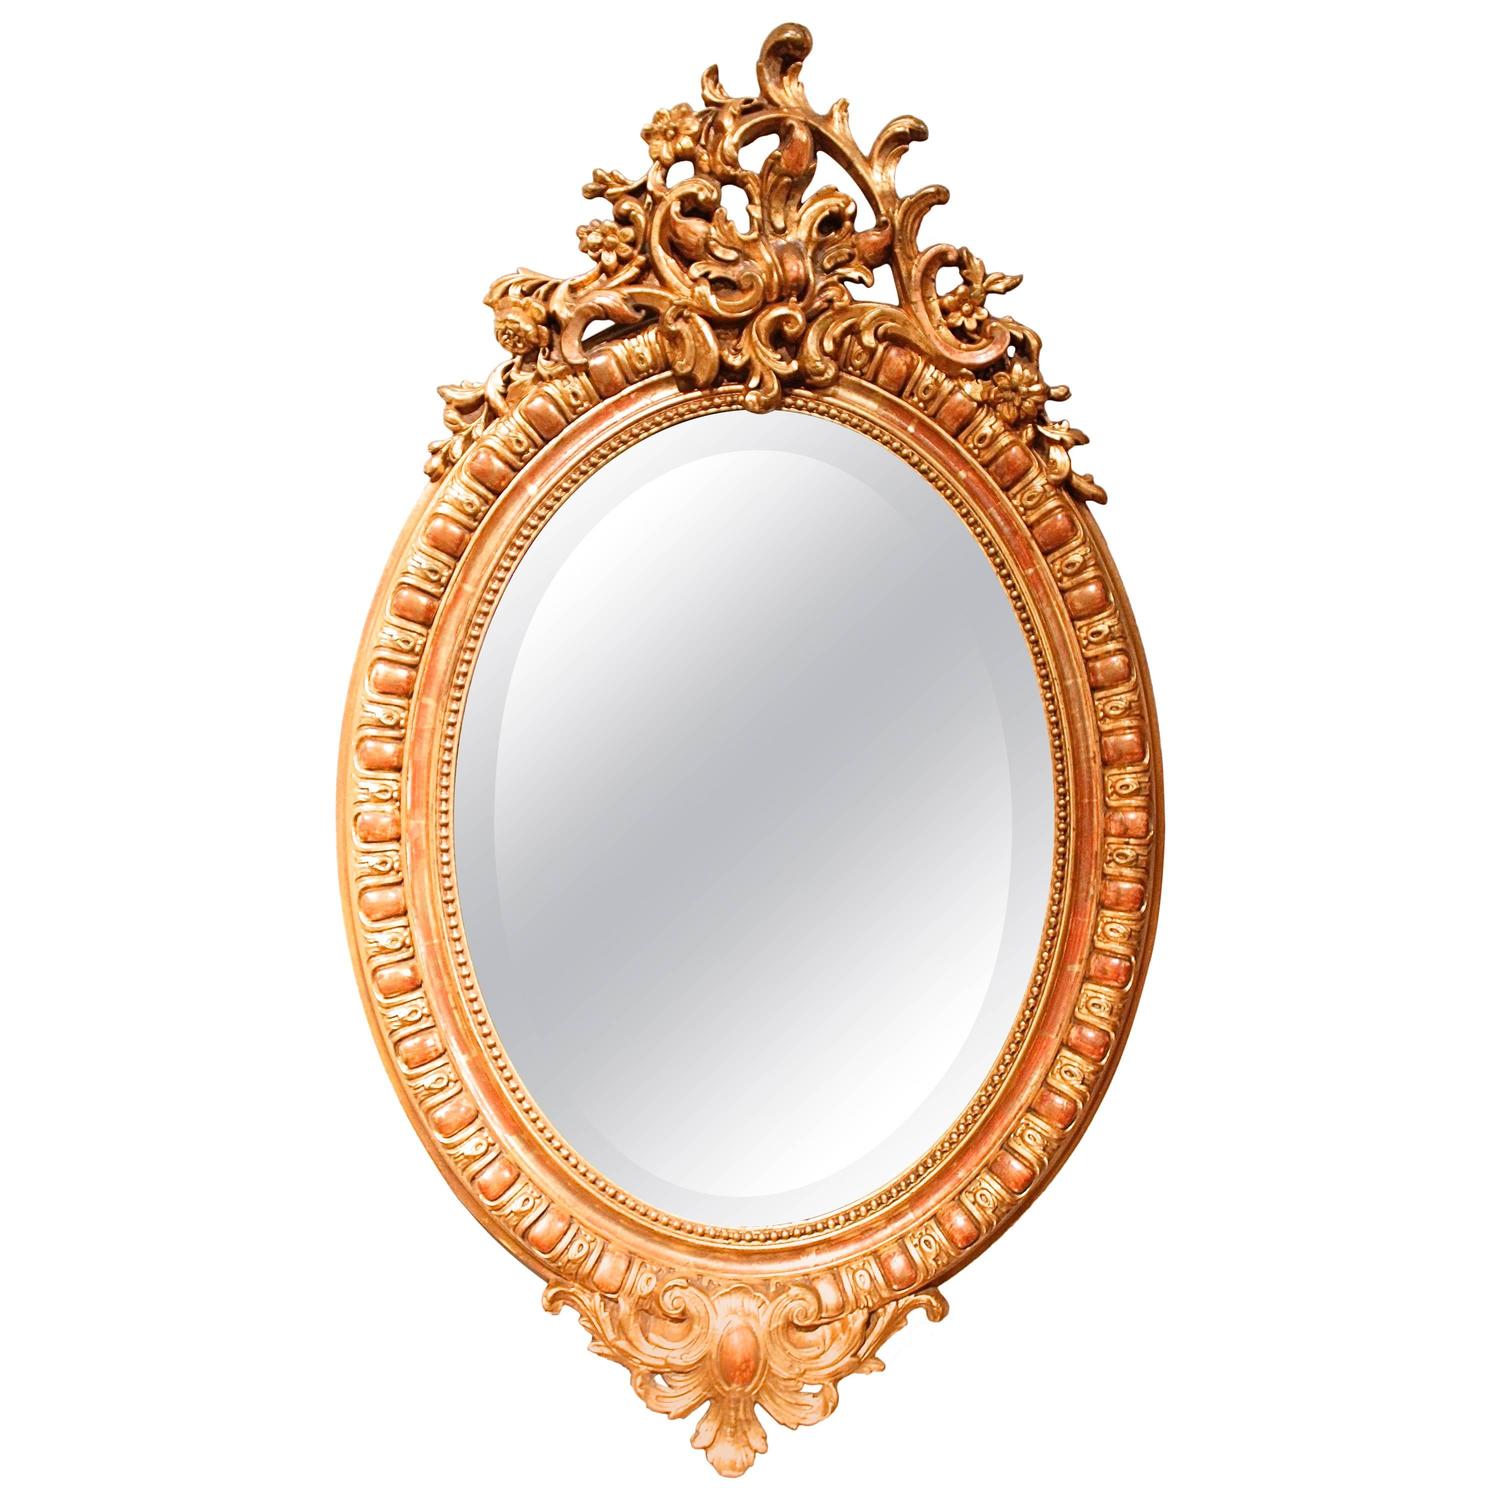 Oval French Gilded Rococo Crested Mirror For Sale at 1stdibs